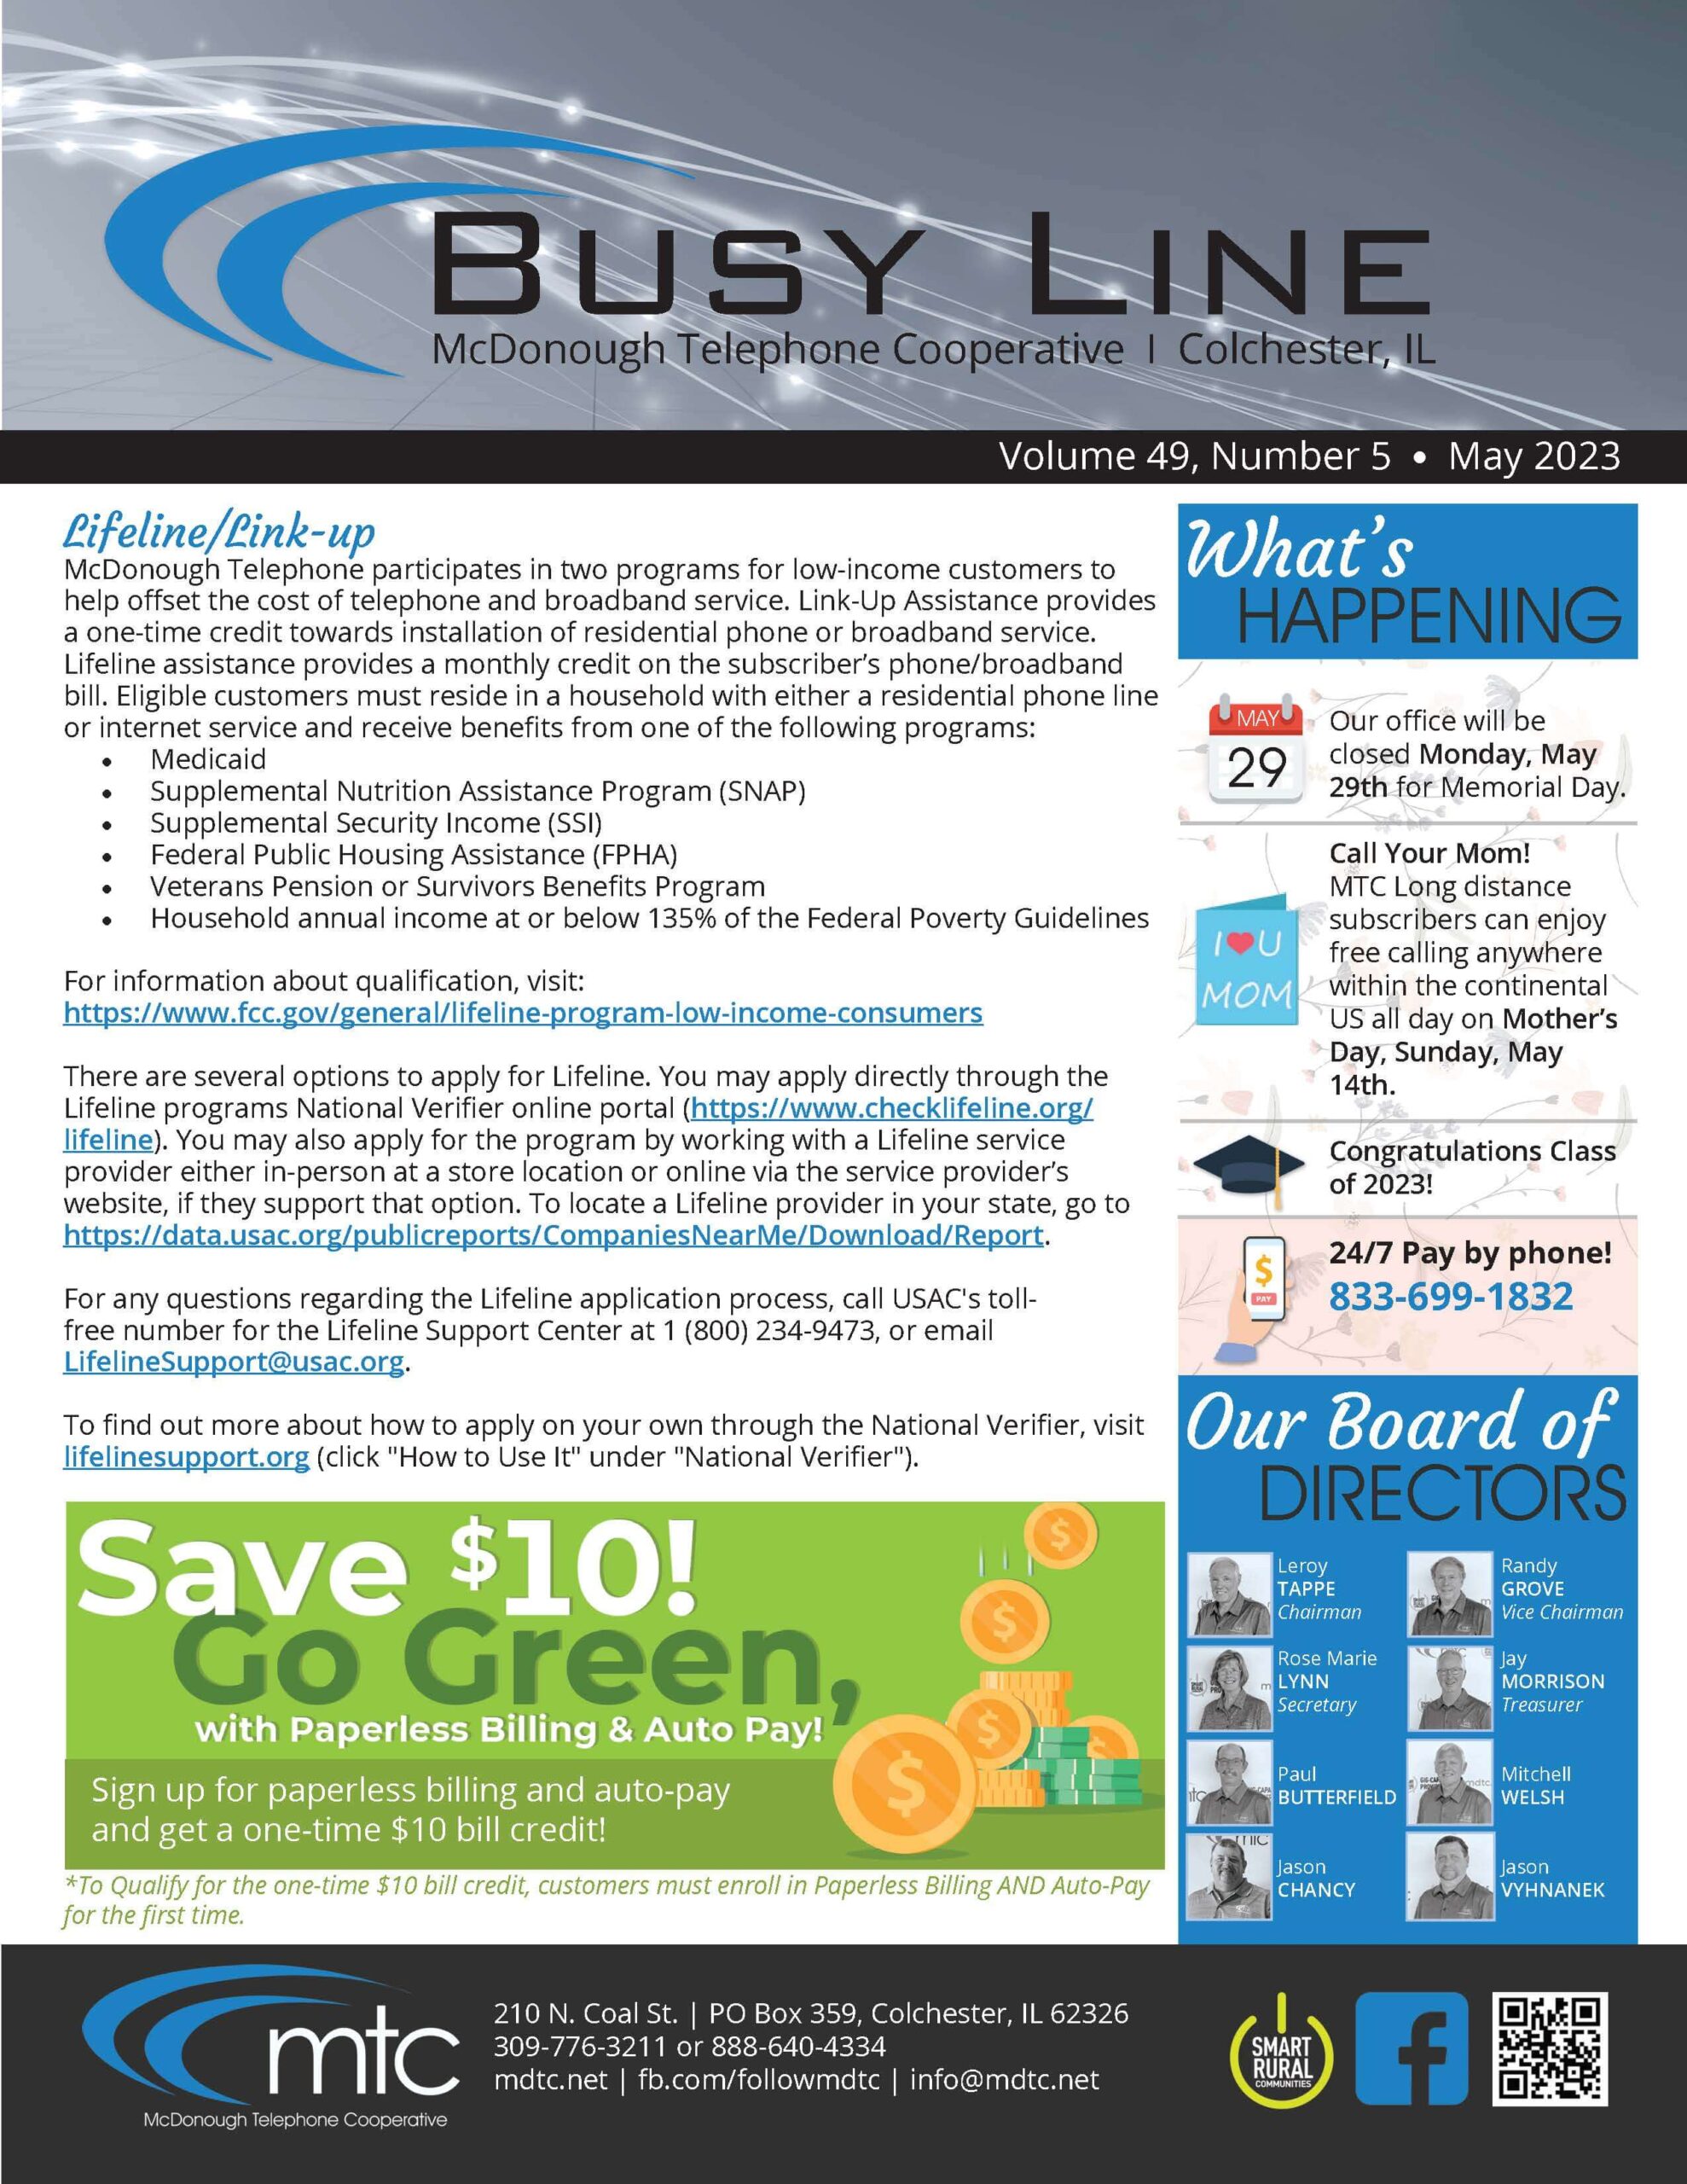 May 2023 Busy line